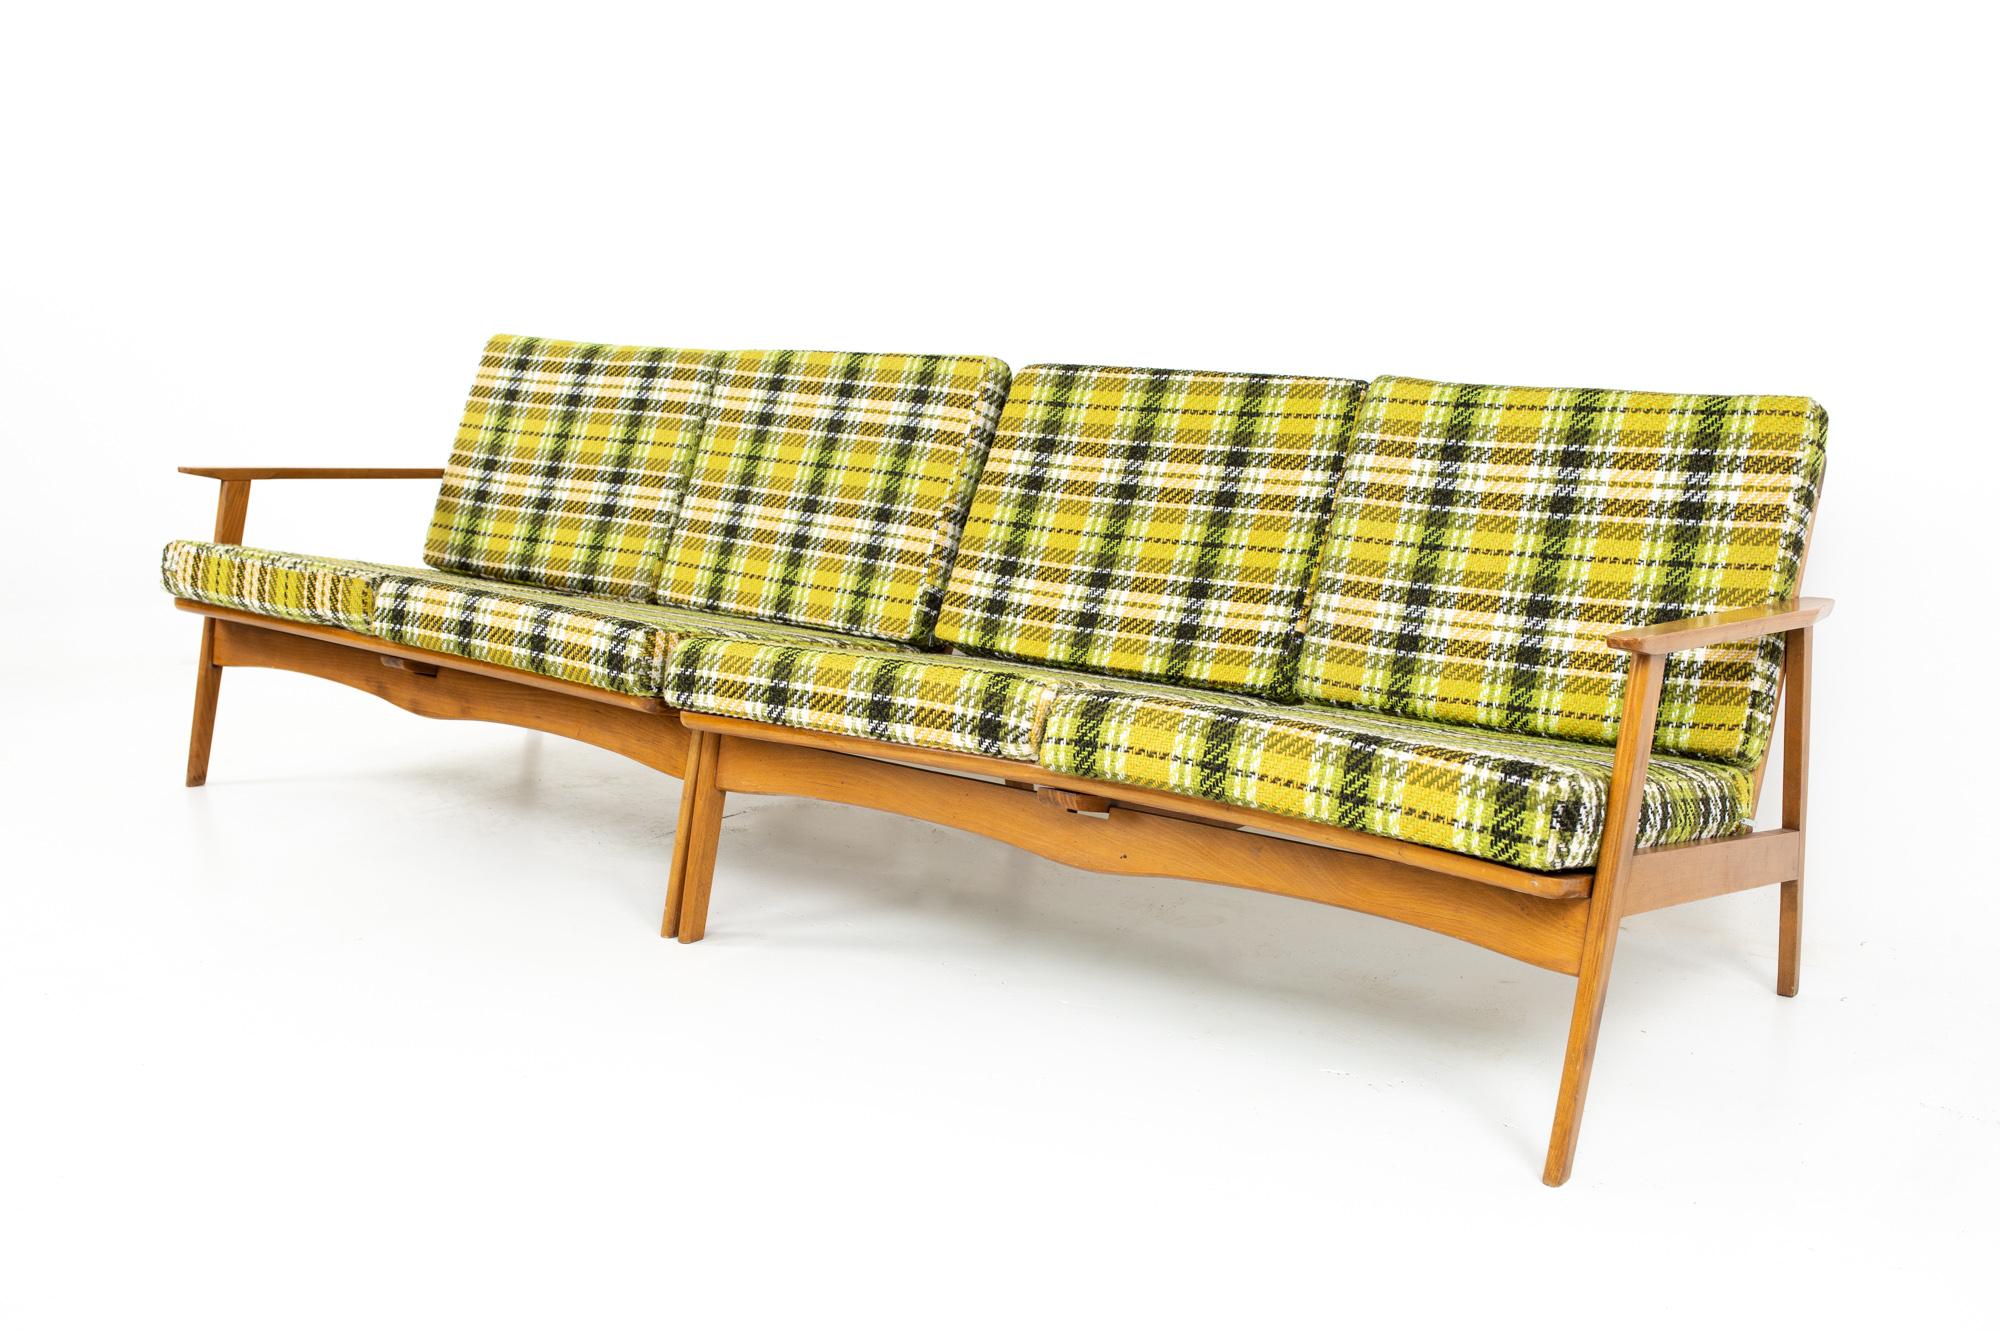 Mid century 2 piece wood framed sectional sofa with green plaid cushions
Sofa measures: 95 wide x 32 deep x 28.5 high, with a seat height of 15.5 inches

All pieces of furniture can be had in what we call restored vintage condition. That means